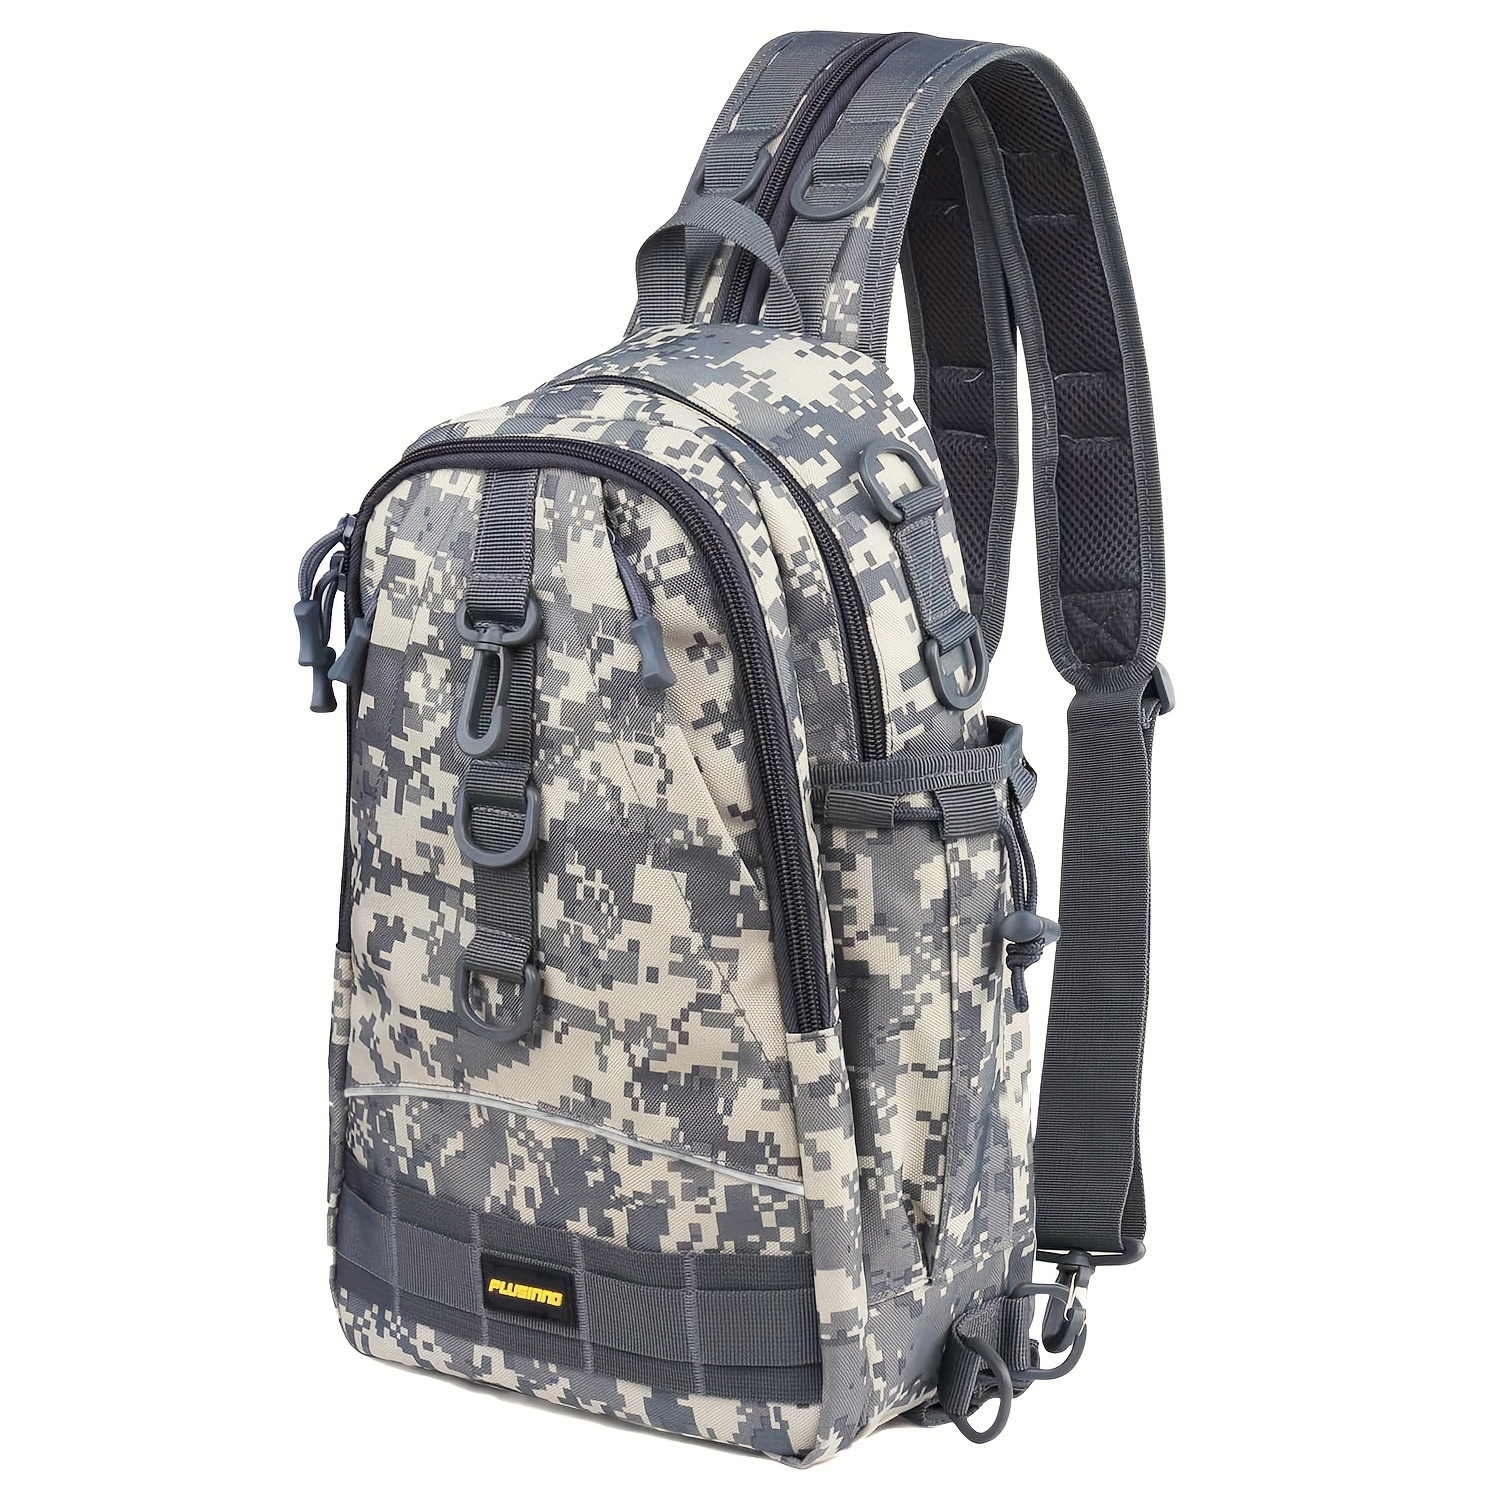 PLUSINNO FISHING TACKLE BACKPACK REVIEW (NEW BEST TACKLE BAG